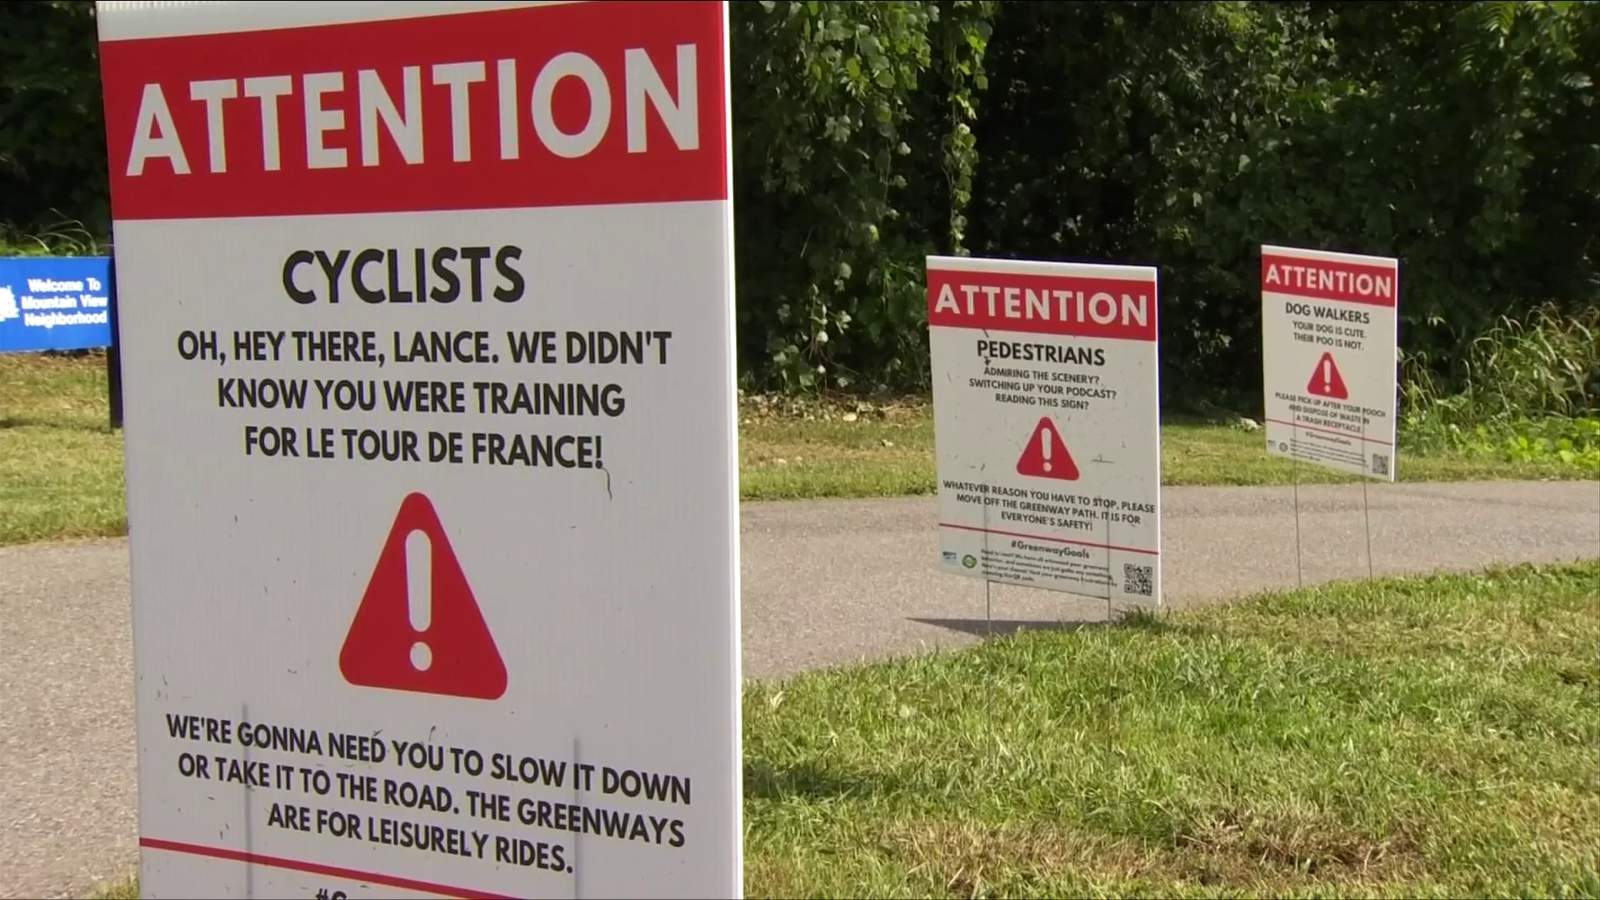 ‘On hey there Lance’: Roanoke puts up new signs encouraging better greenway behavior